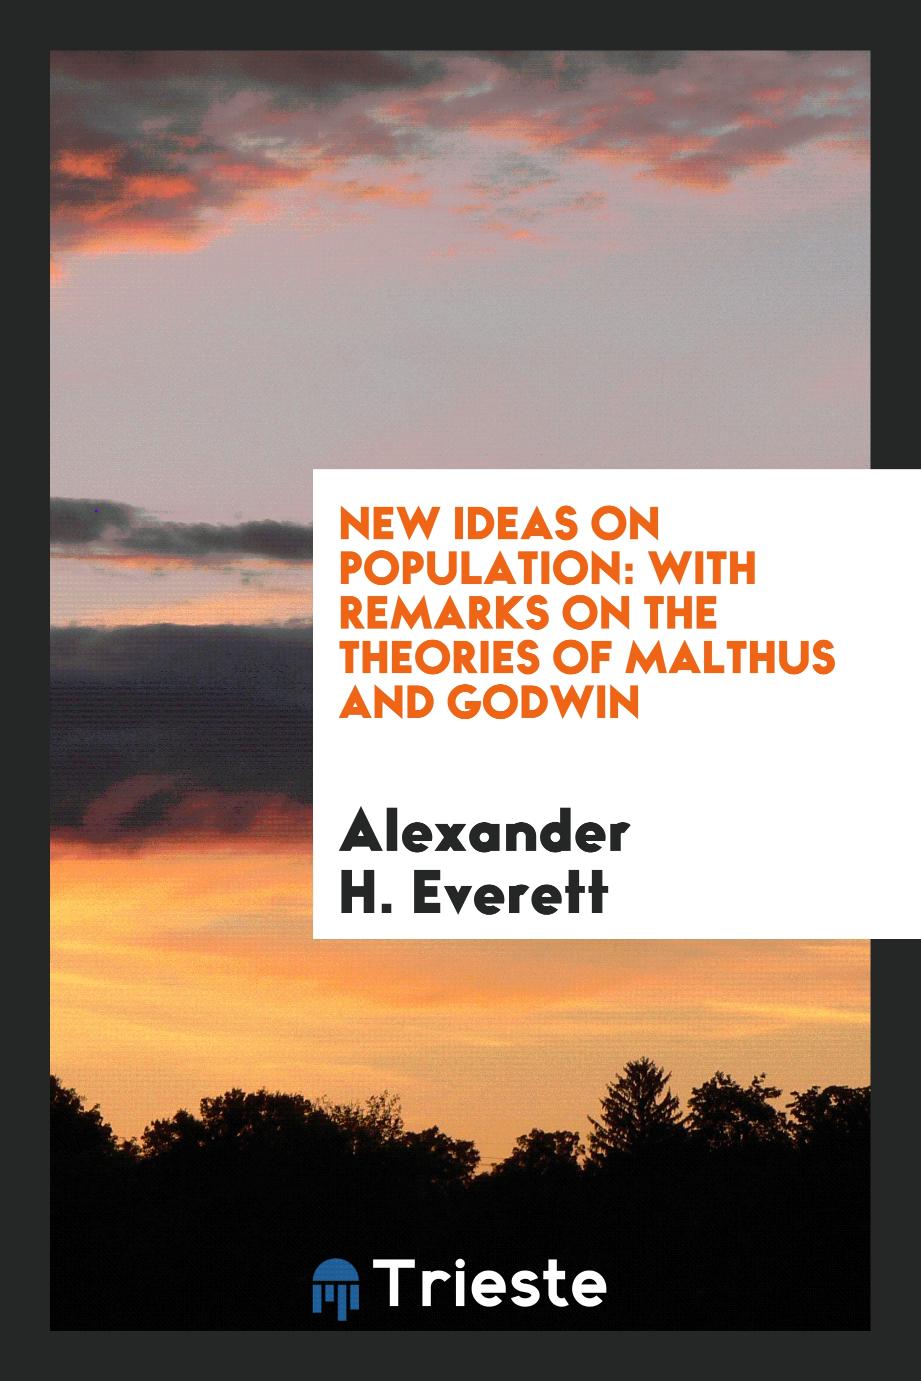 New Ideas on Population: with Remarks on the Theories of Malthus and Godwin